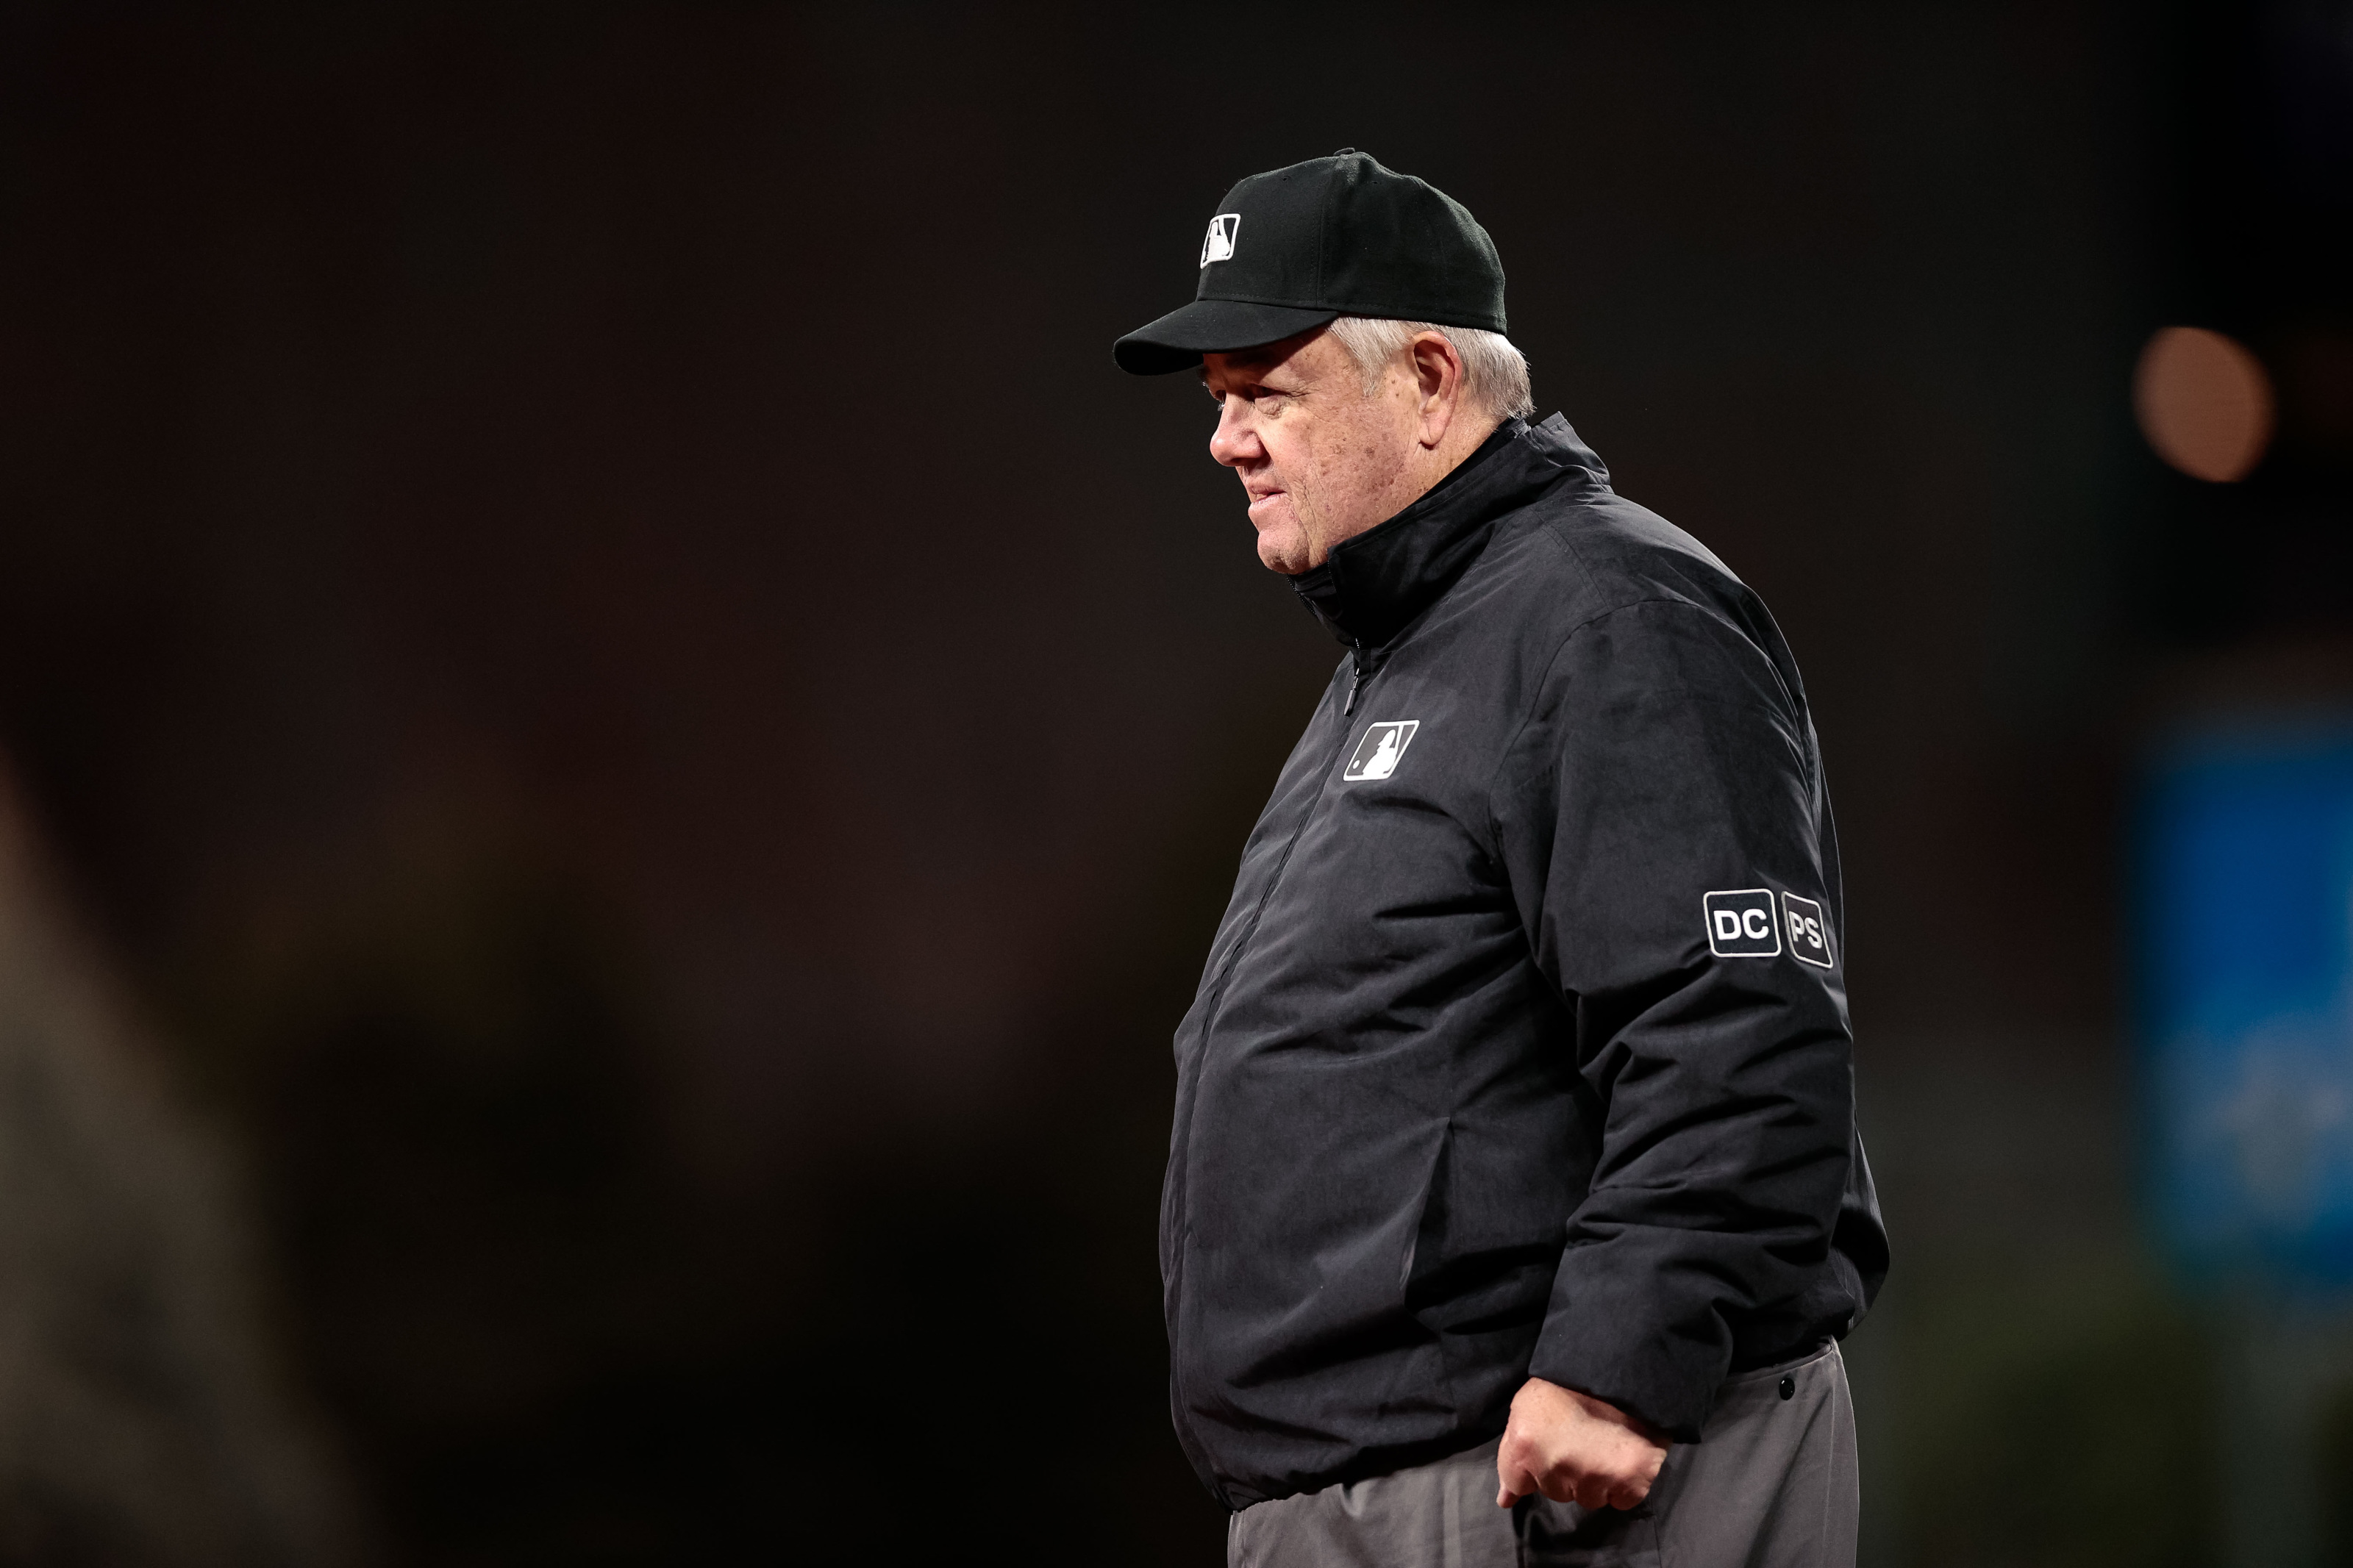 Study Finds that Old Men with Experience are Actually the Worst MLB Umpires   FanBuzz